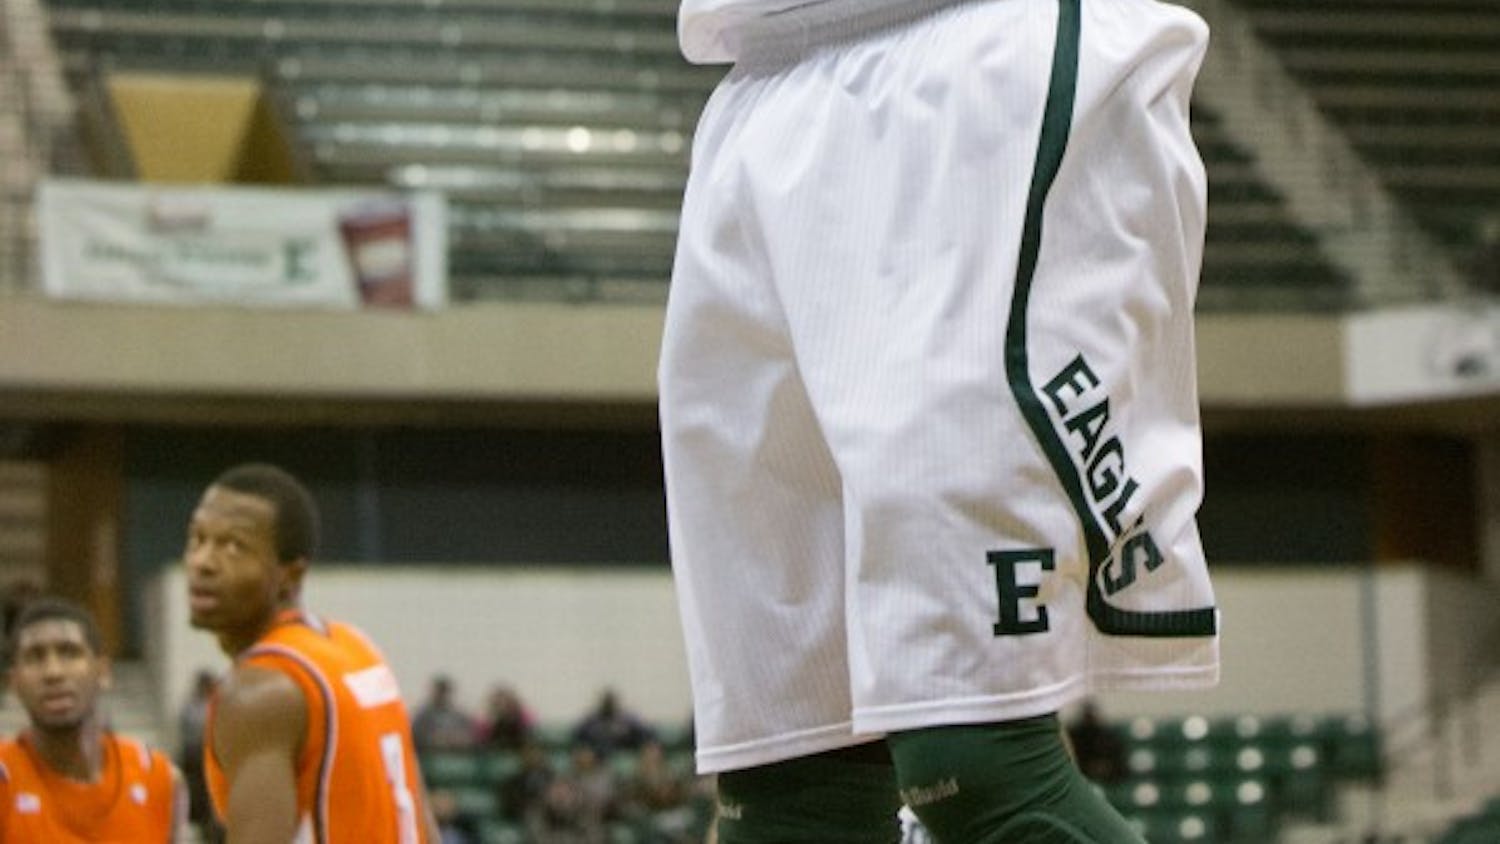 EMU forward Daylen Harrison collected 10 points in Eastern Michigan's 69-57 win over Bowling Green Wednesday night.